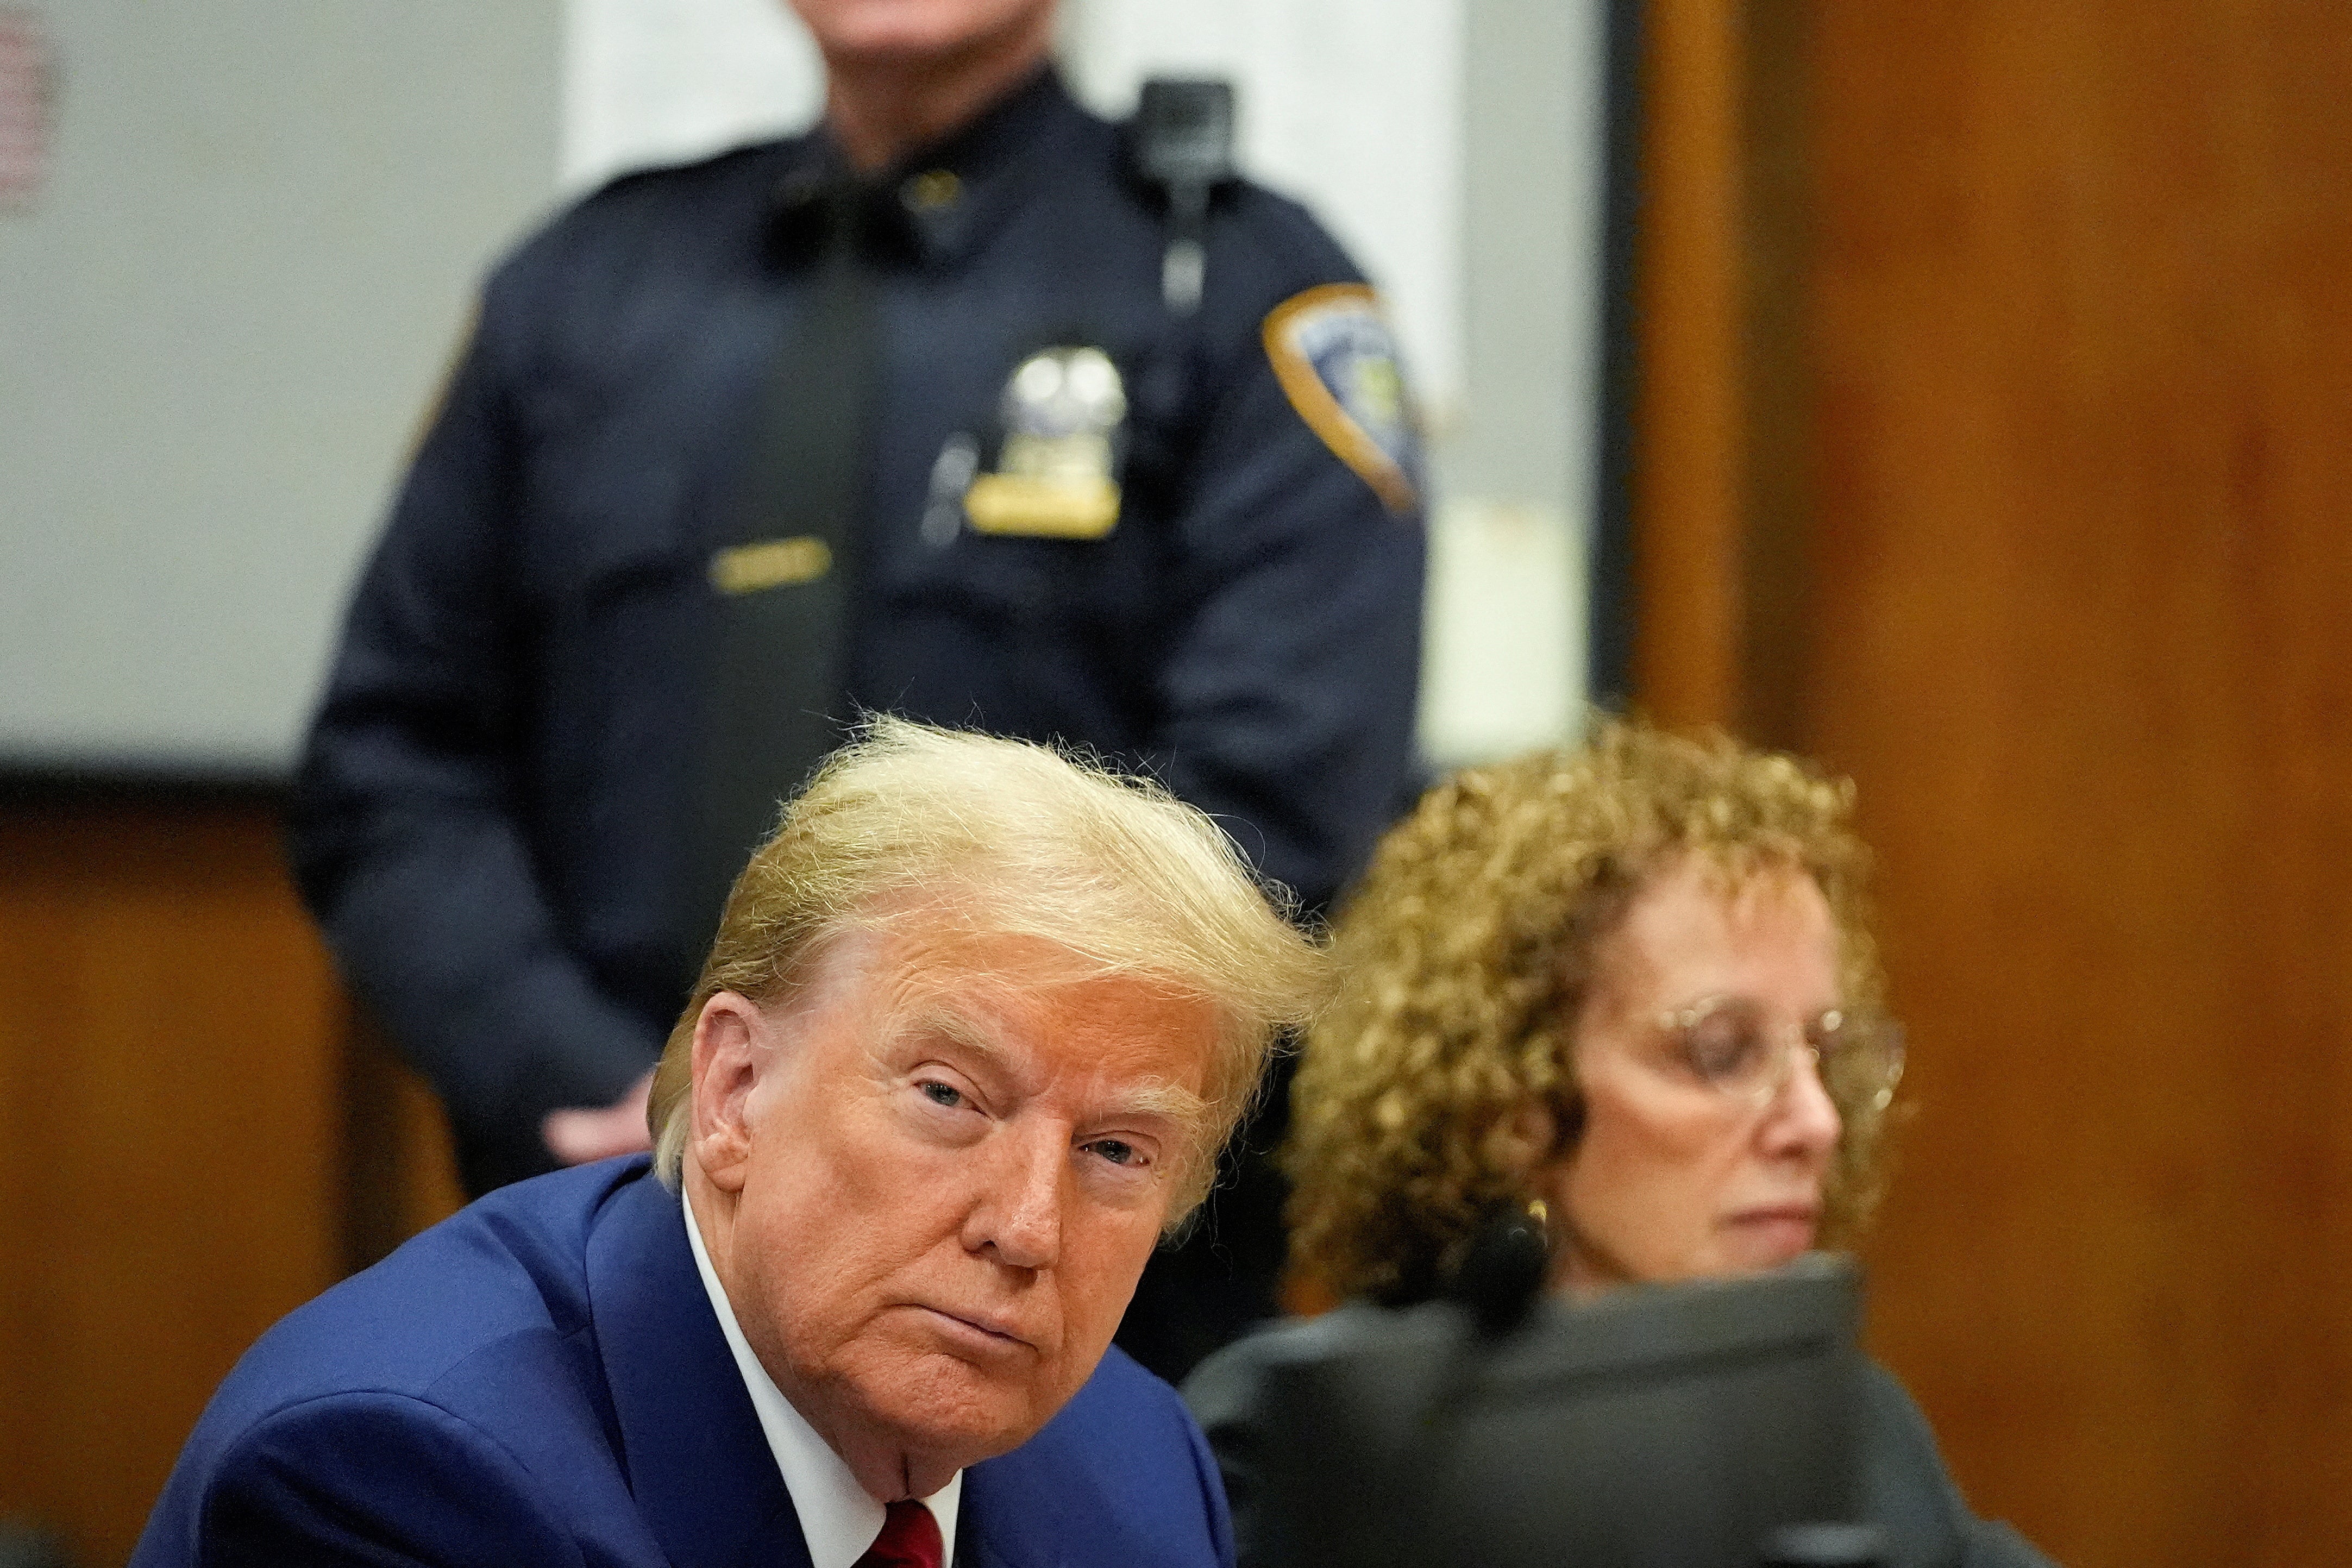 Donald Trump appears in a Manhattan criminal courtroom on 25 March